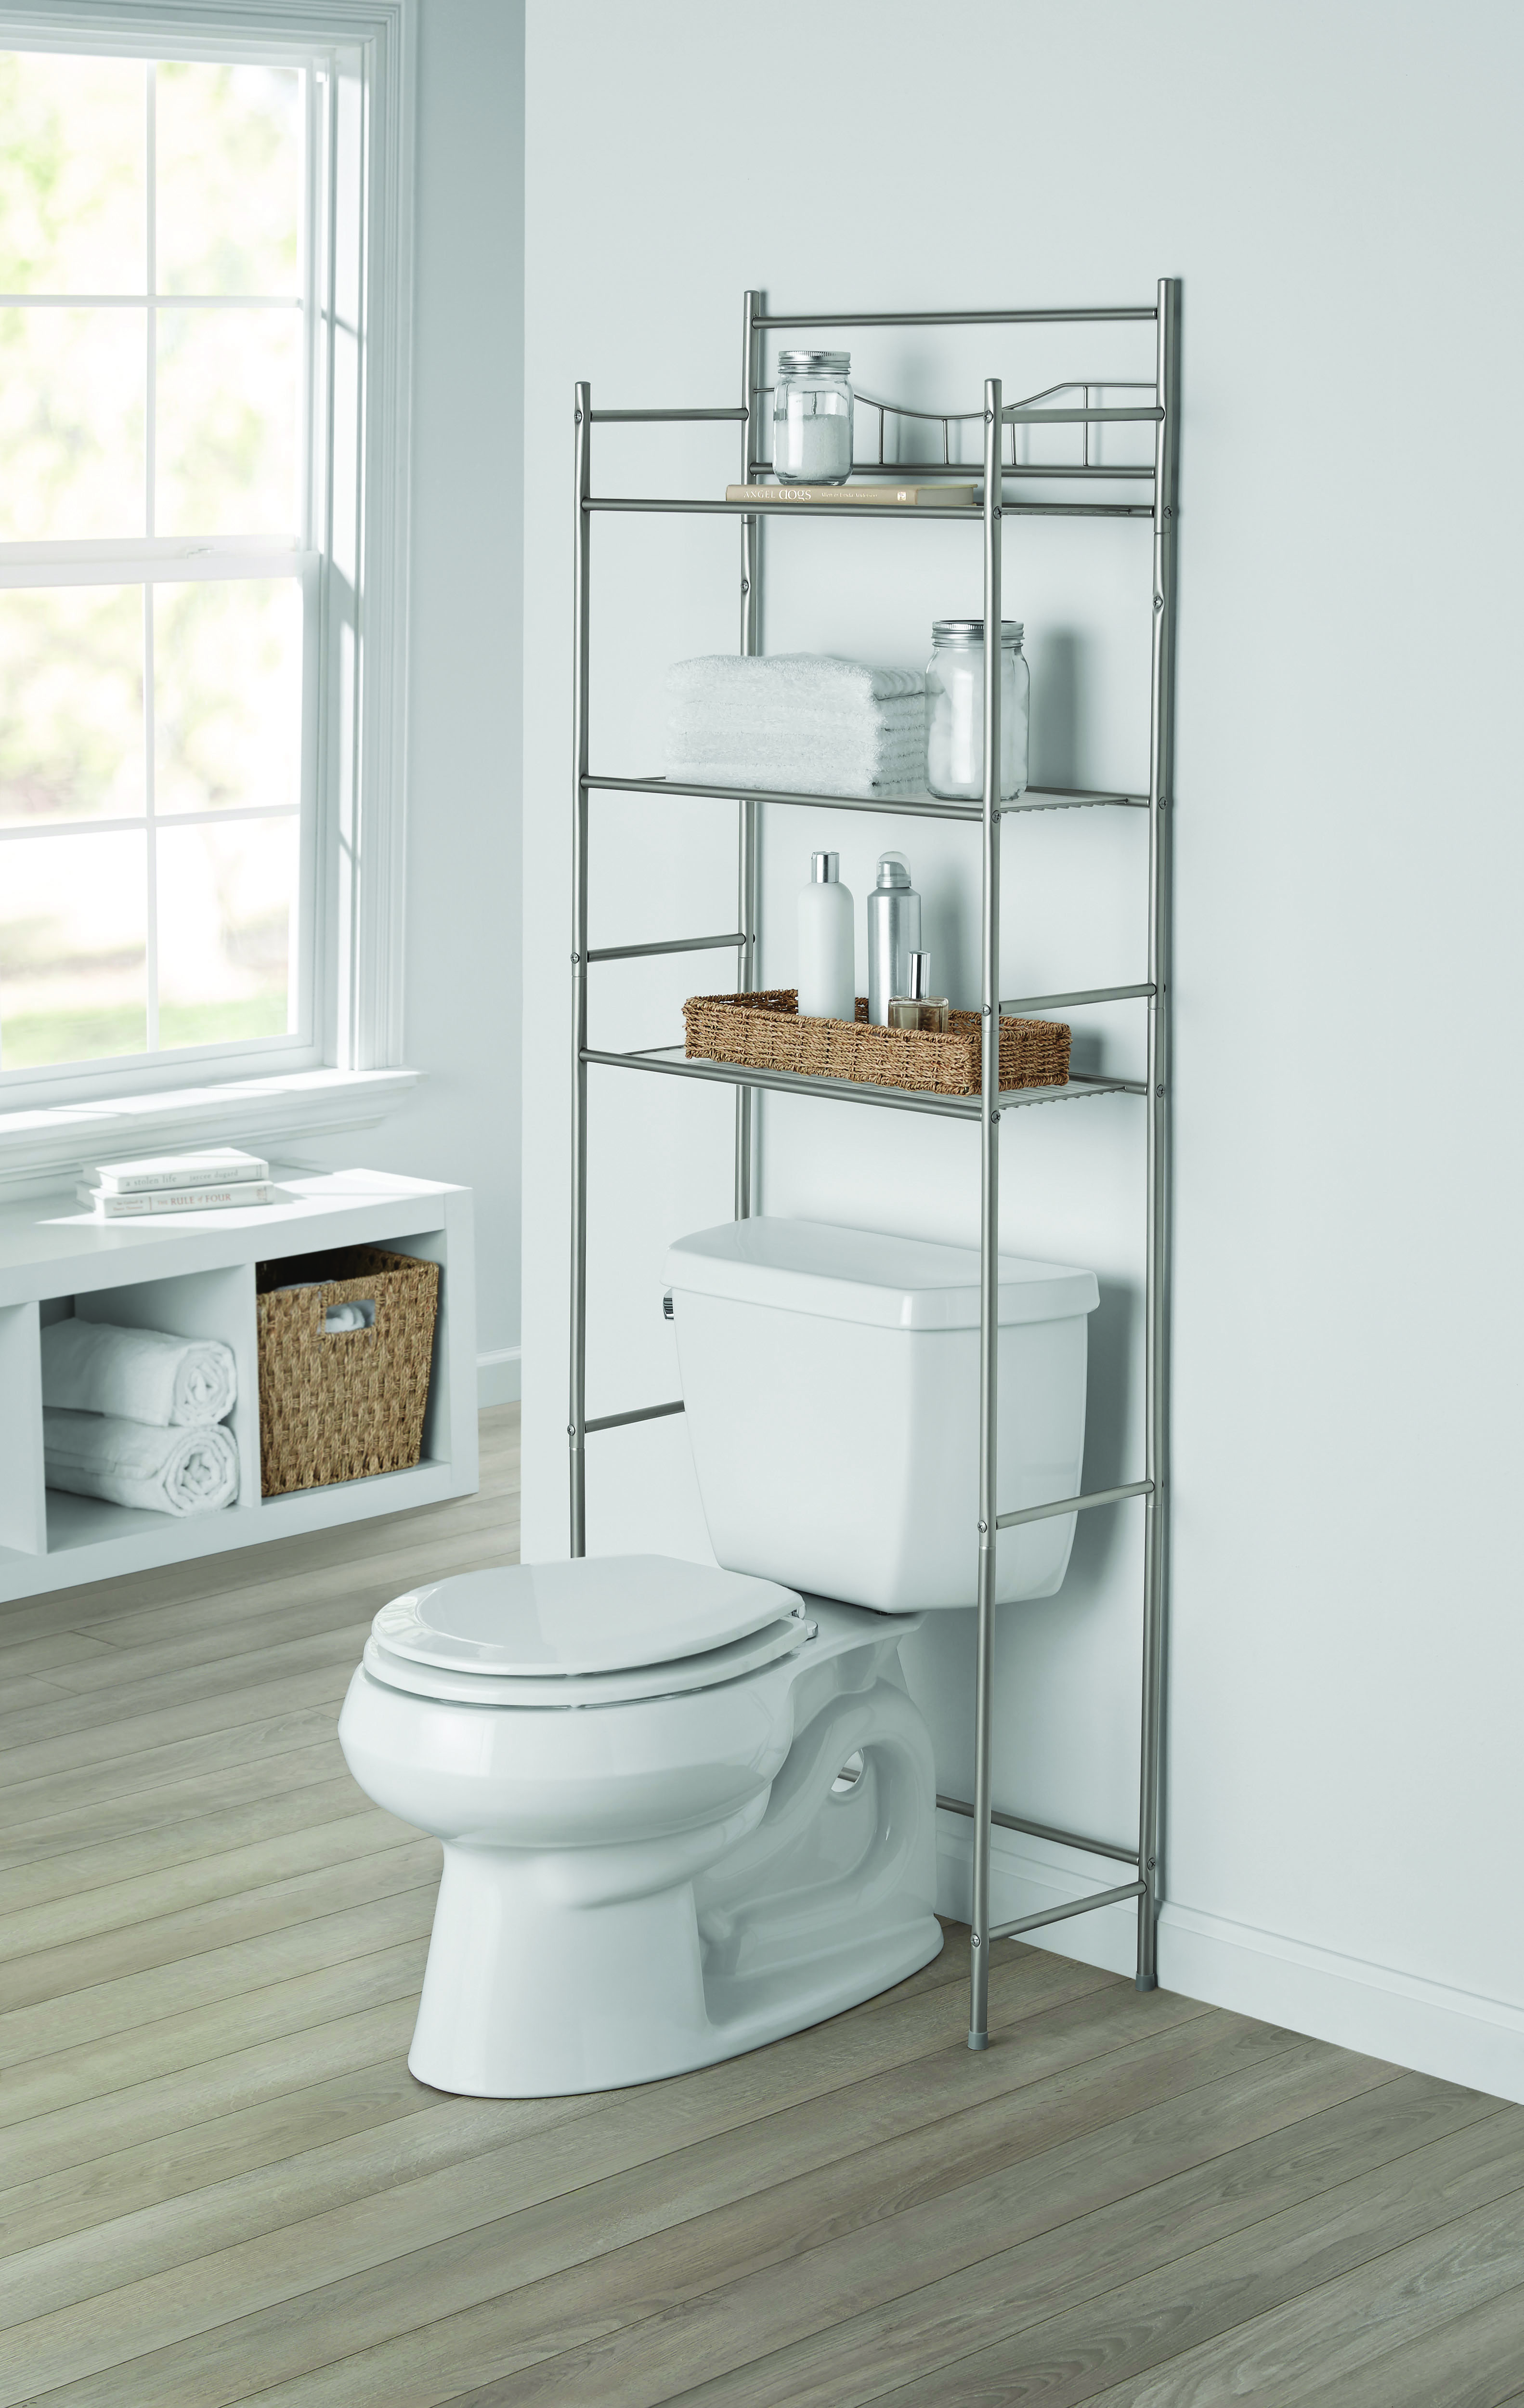 Mainstays 3-Shelf Bathroom over the Toilet Space Saver with Liner, Satin Nickel for Adults - image 4 of 8